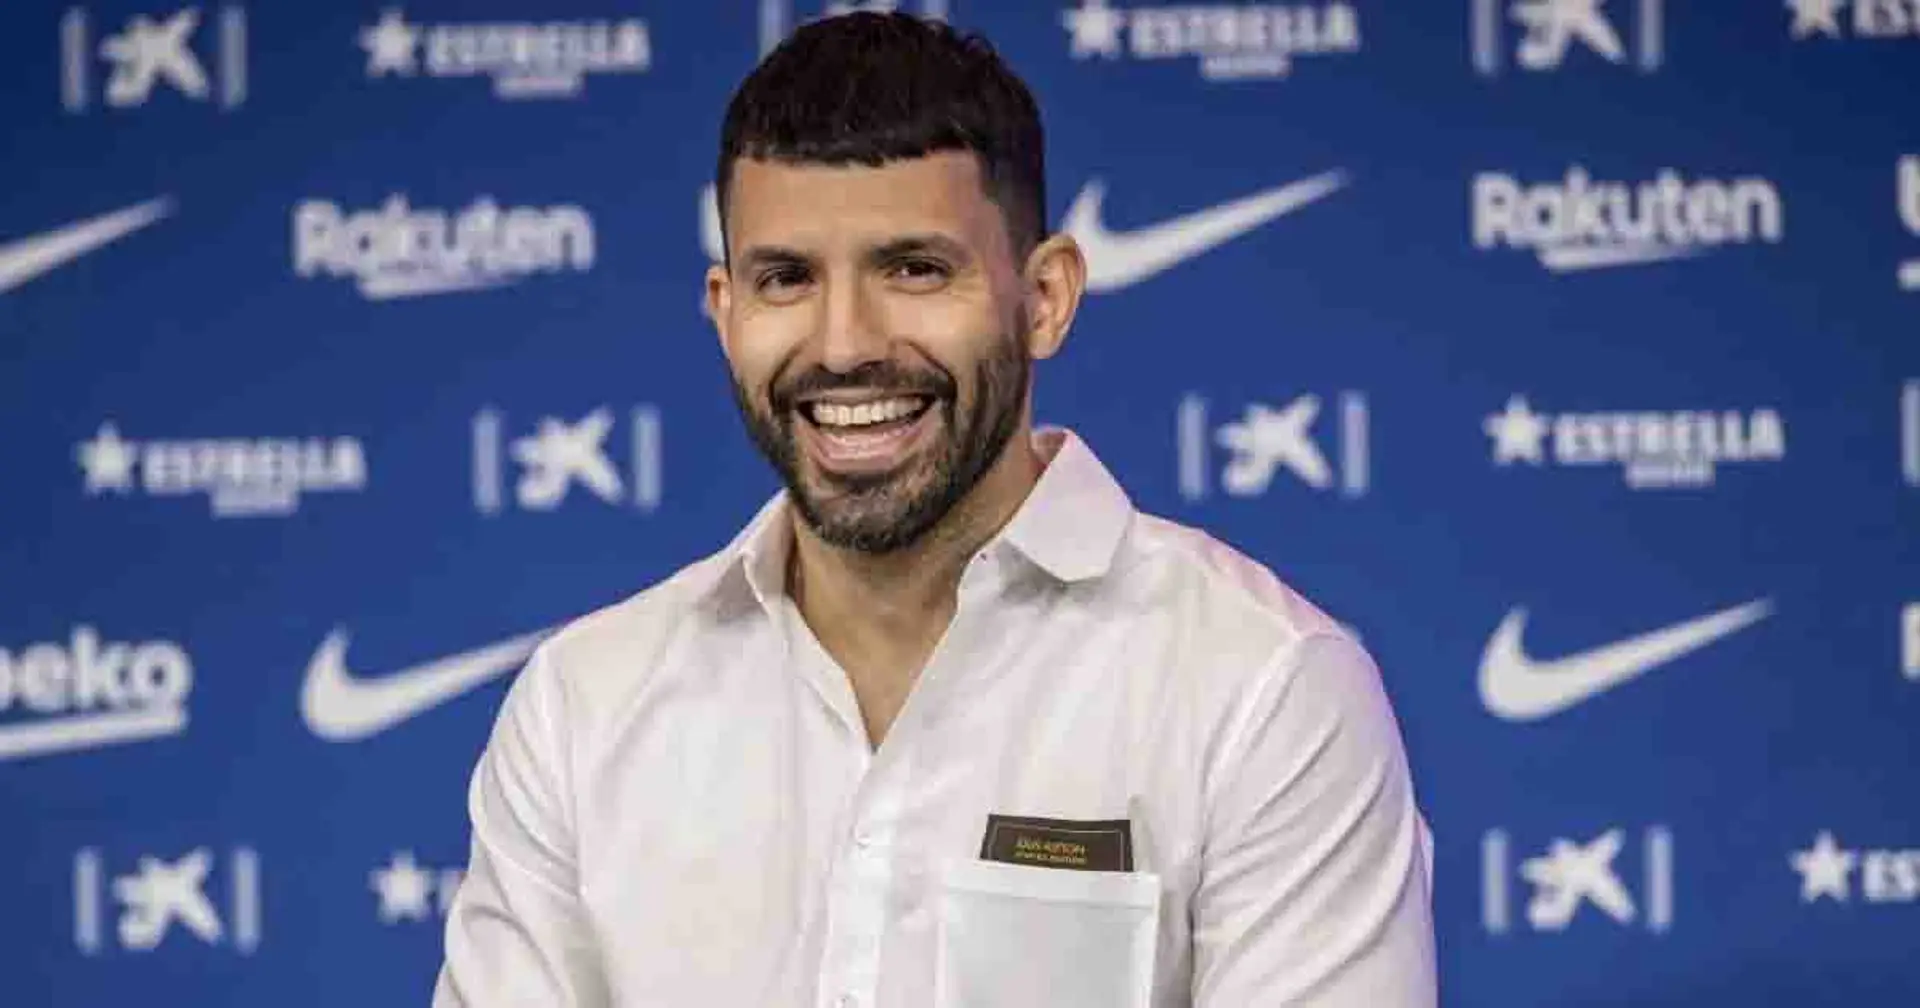 'It felt like 10 years': Aguero explains how his three-month stint at Barca stands out in his career